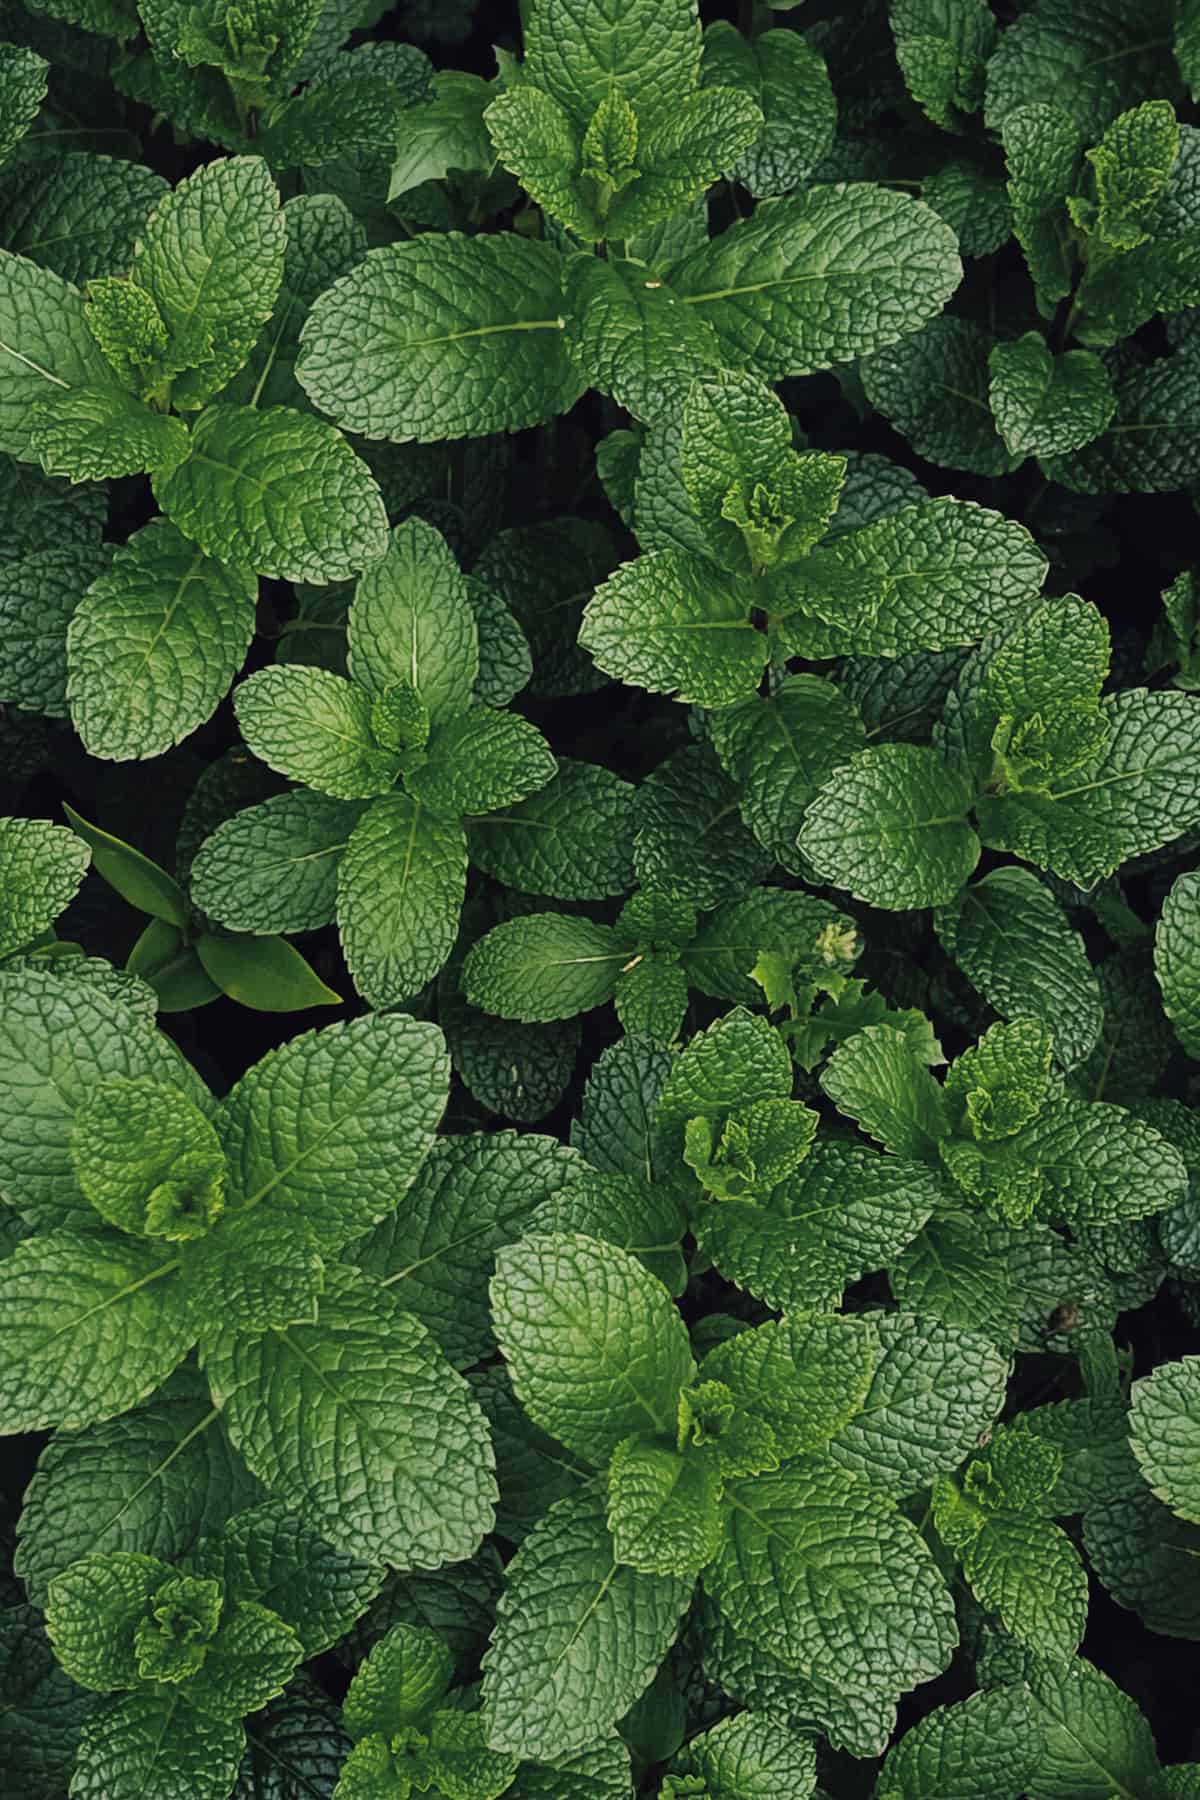 Fresh peppermint: You can use the herb to flavor ginger tea